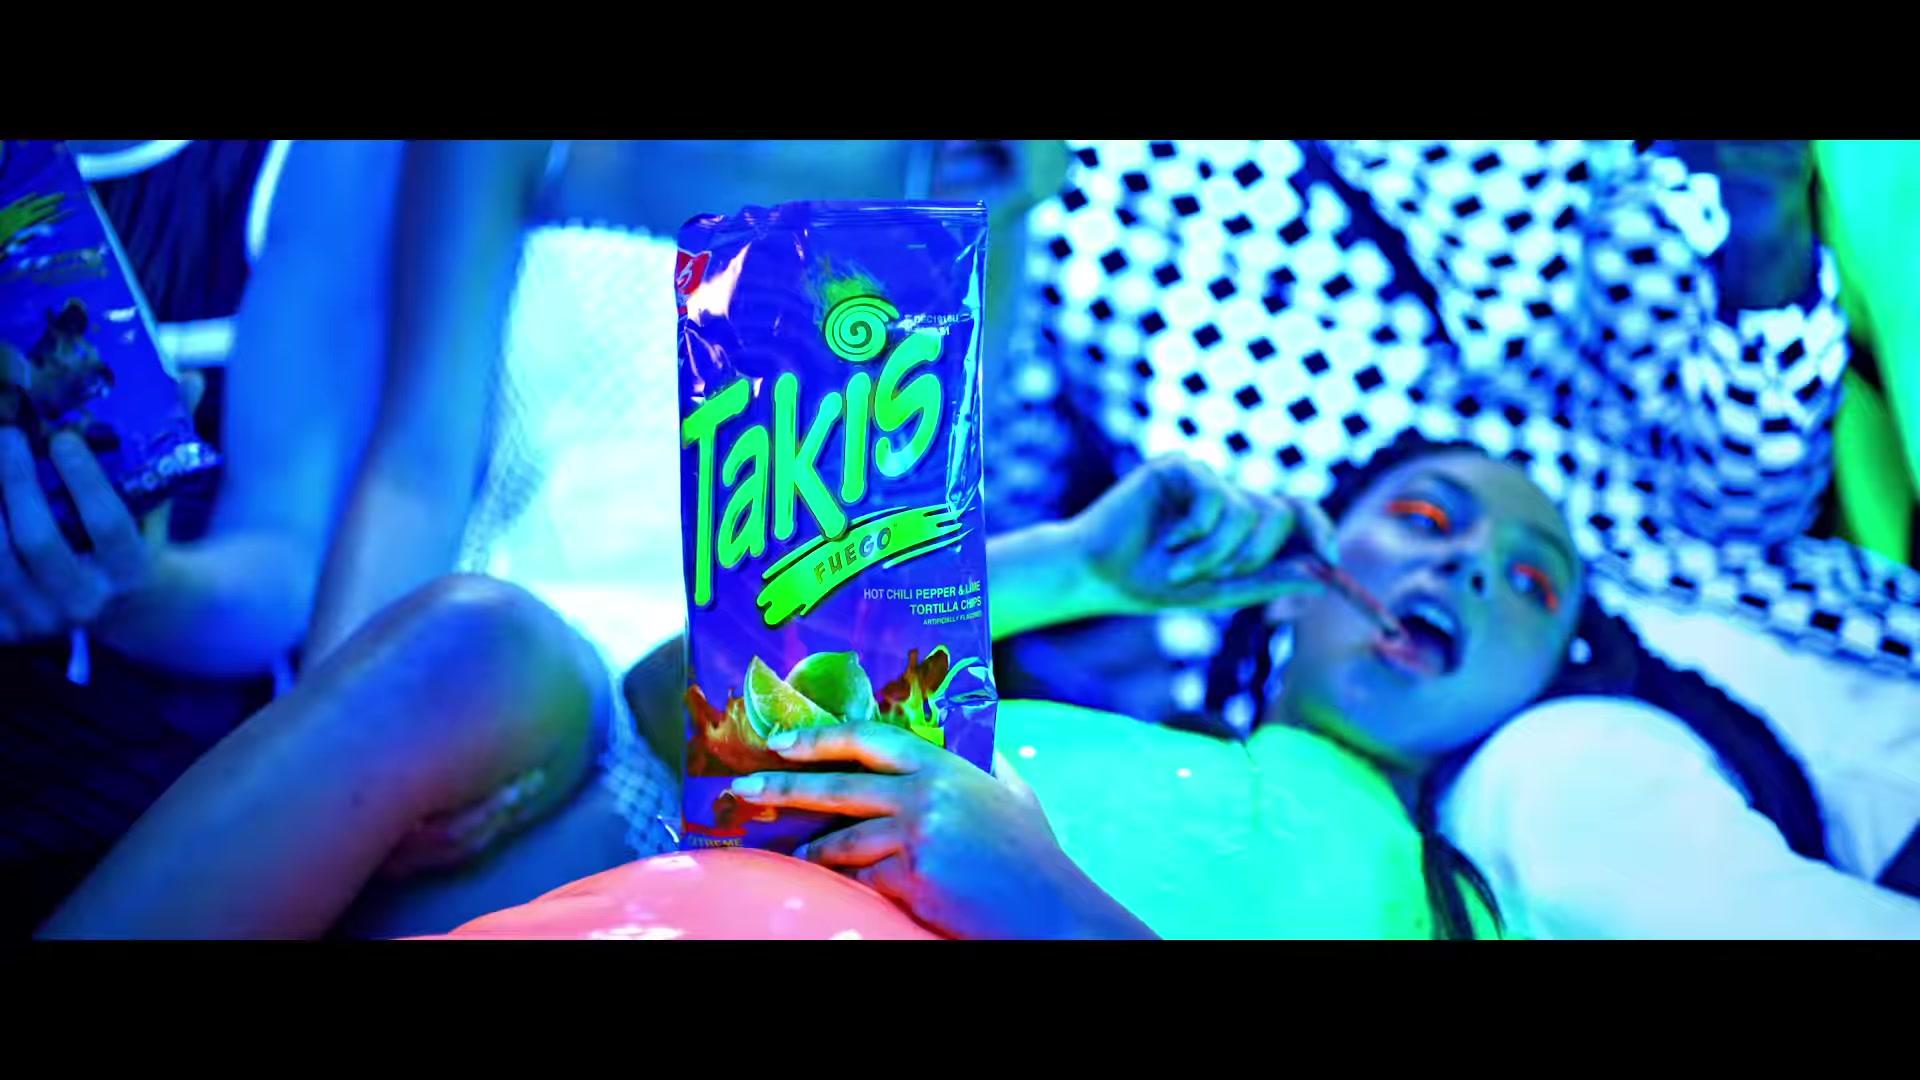 Takis Fuego Tortilla Corn Chips in “Say My Name”